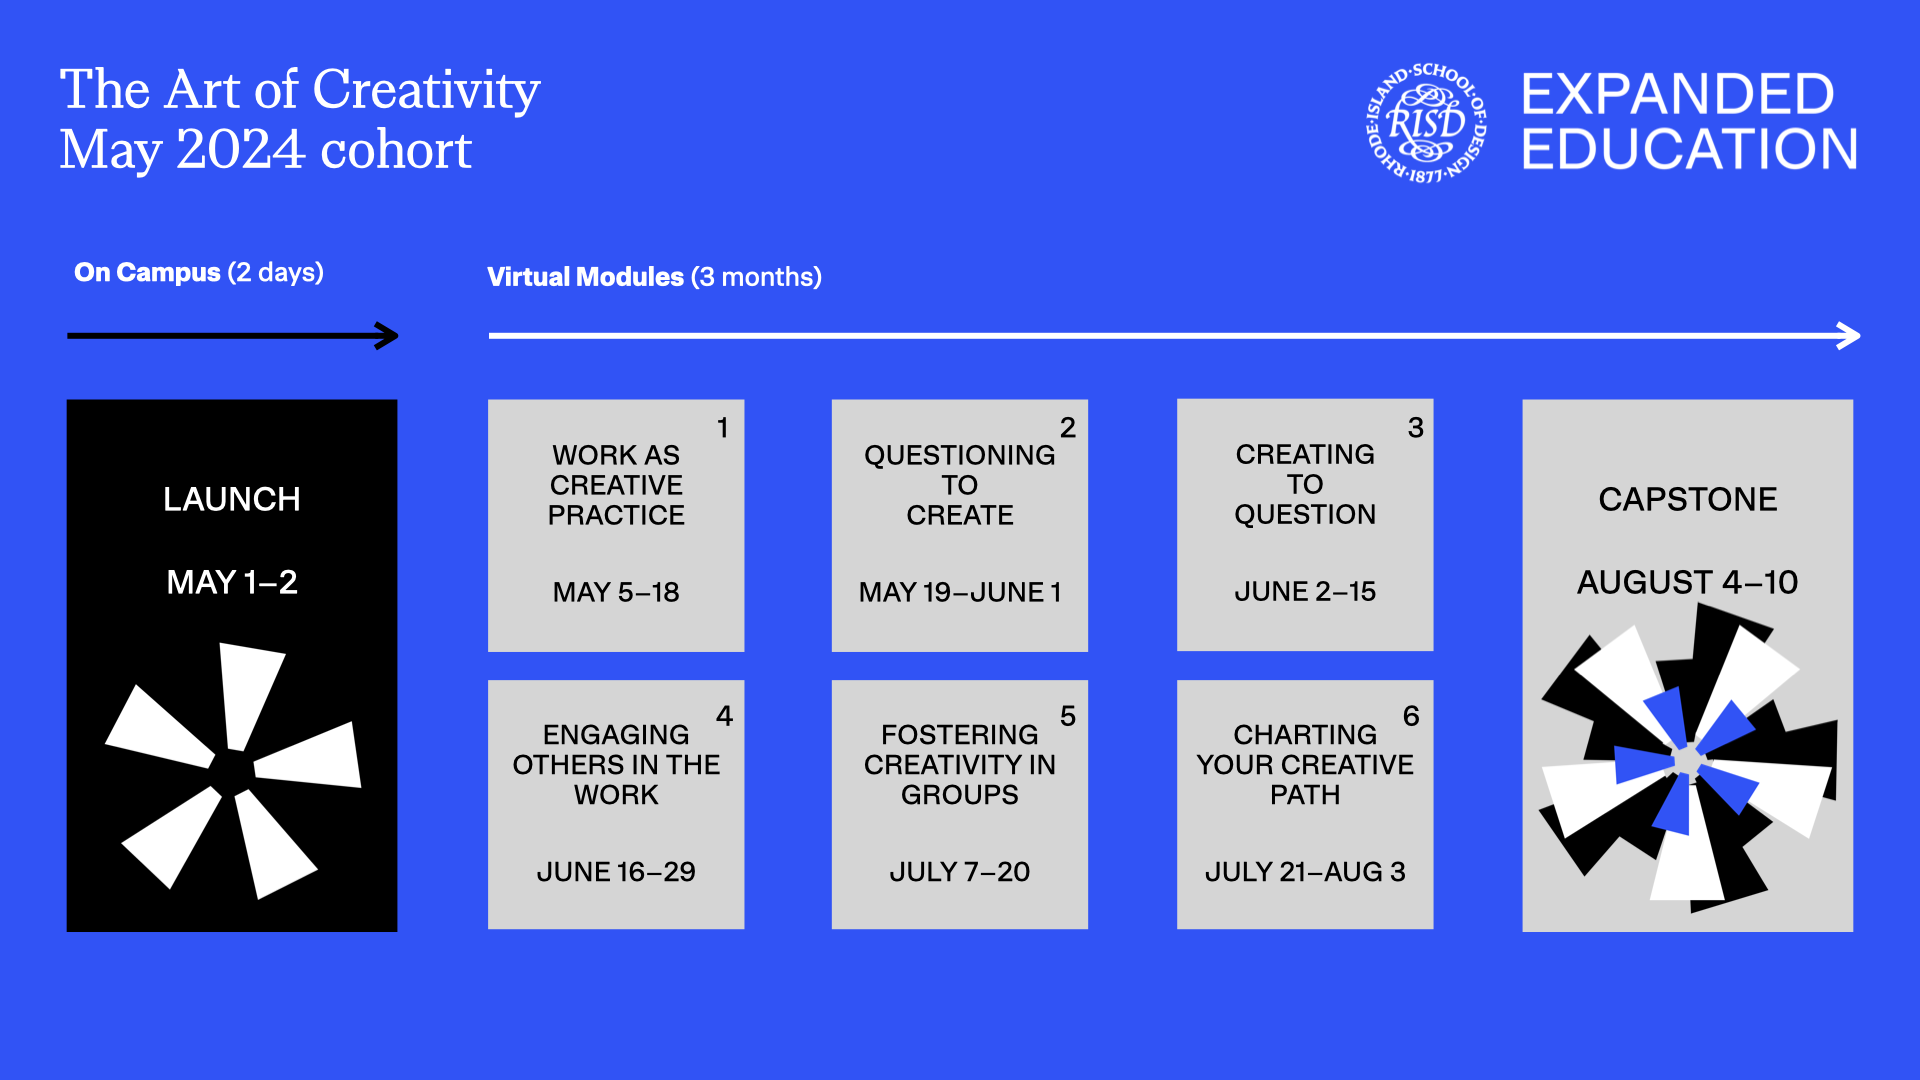 Graphic with key dates for Art of Creativity May 2024